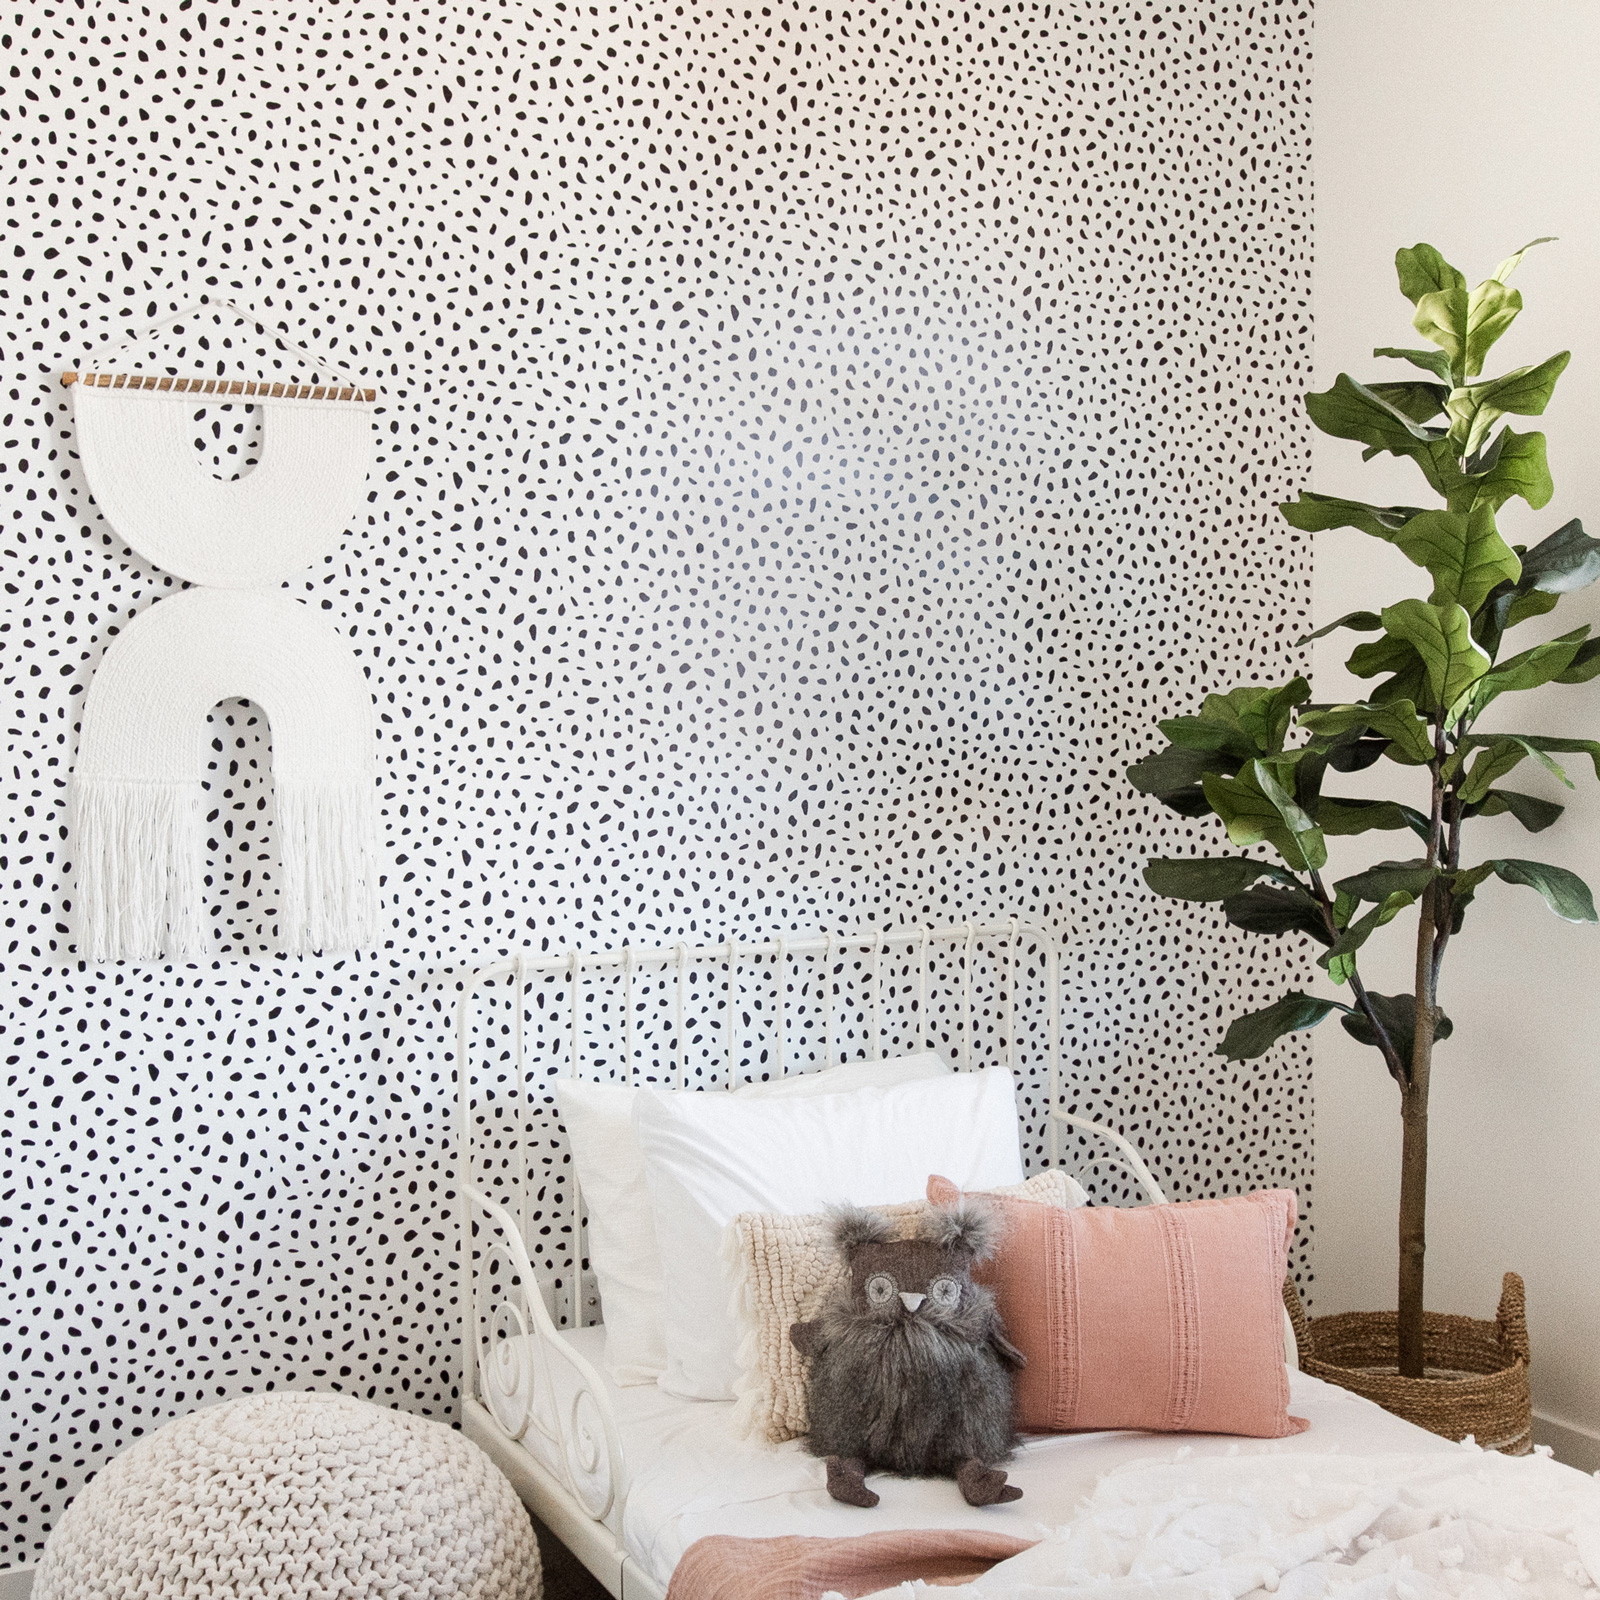 How To Do a Quick Home Makeover With Removable Wallpaper